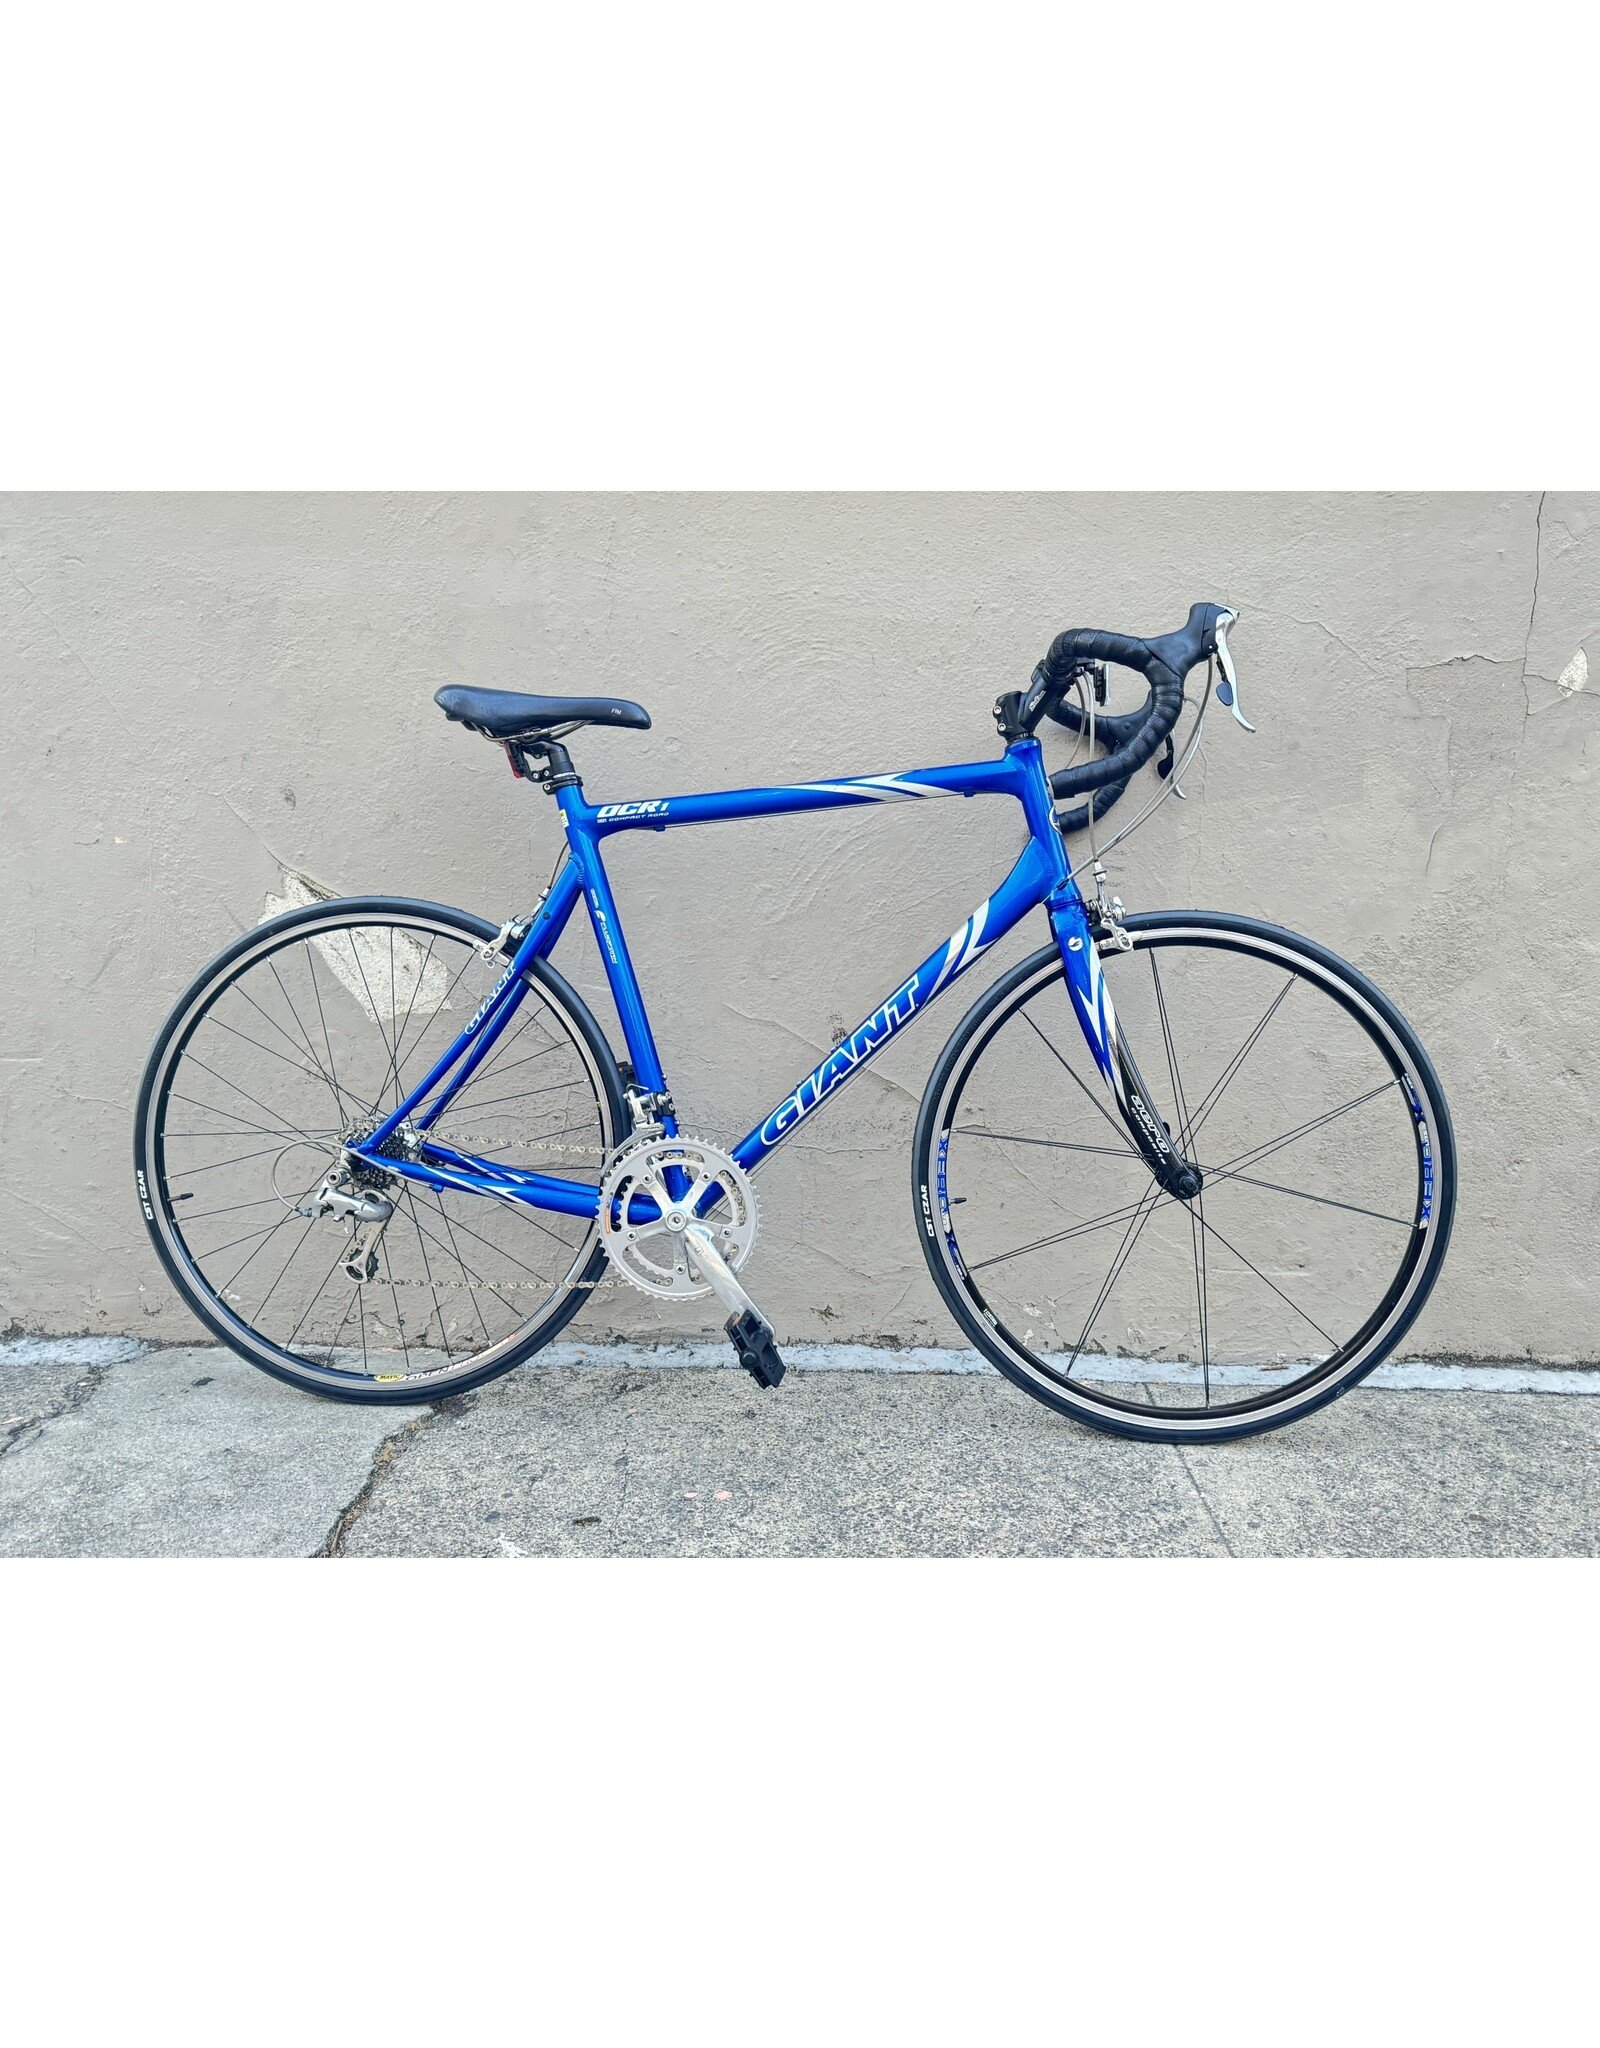 Giant Giant OCR1,  23 Inches, 2005, Blue